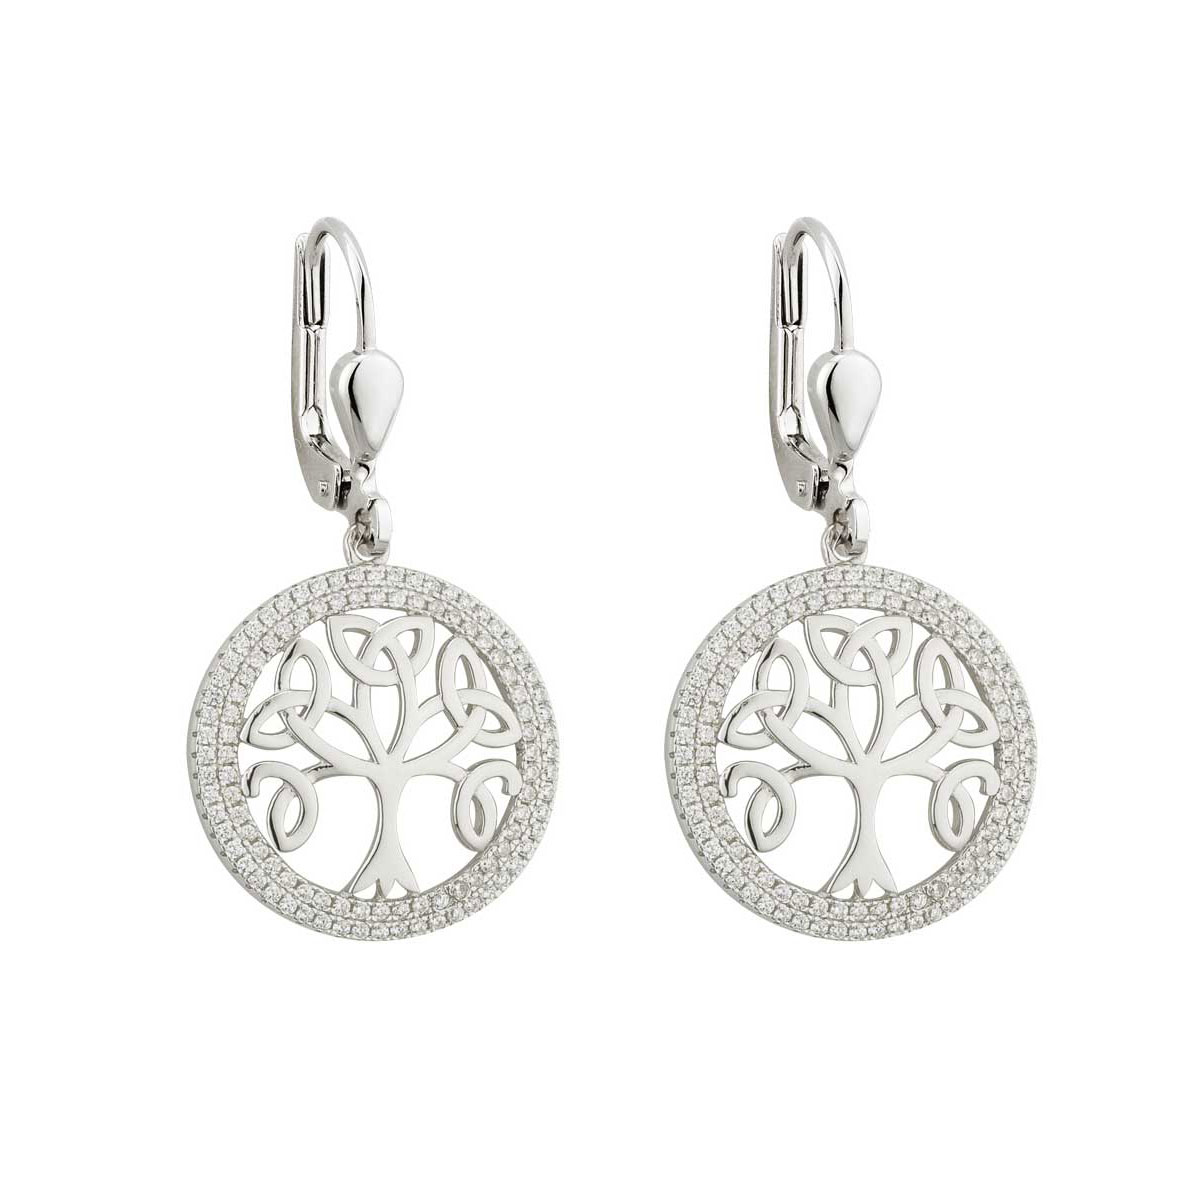 Cashs Ireland, Crystal Pave Sterling Silver Tree of Life Drop Pierced Earrings Pair